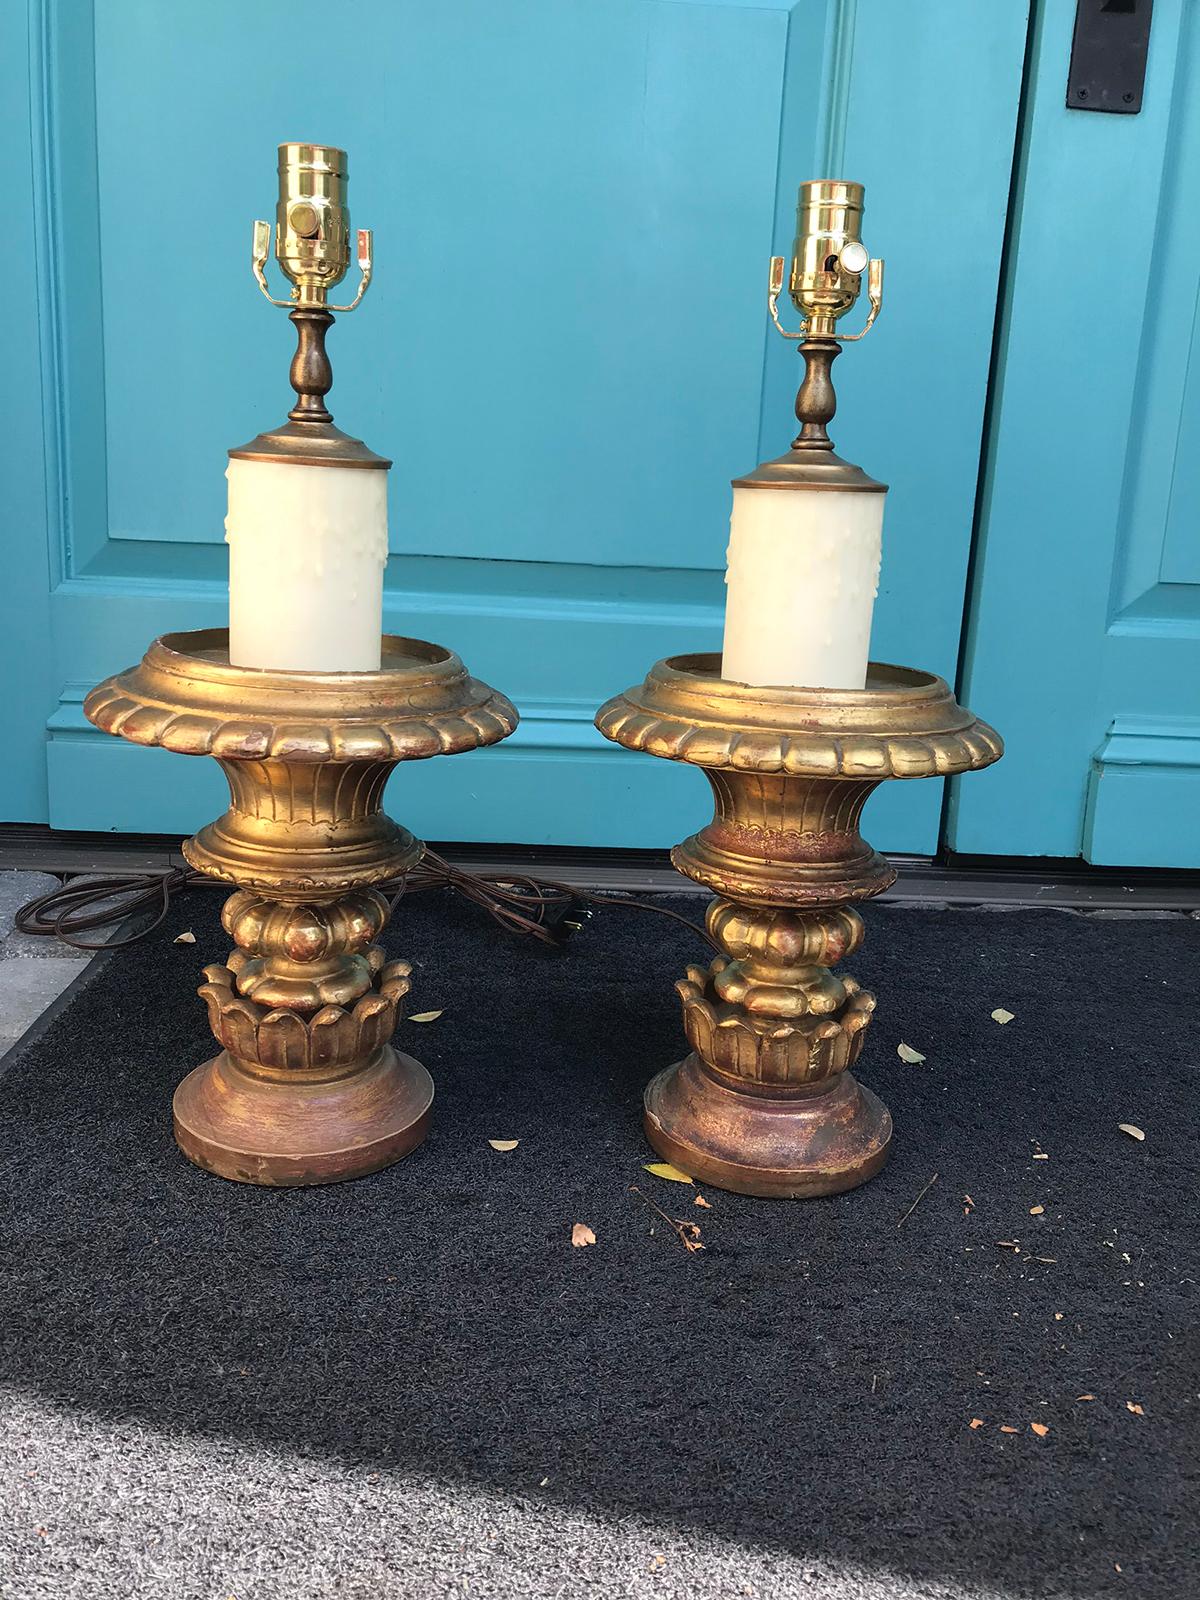 Pair of 19th century giltwood and gesso urns as lamps
Brand new wiring.